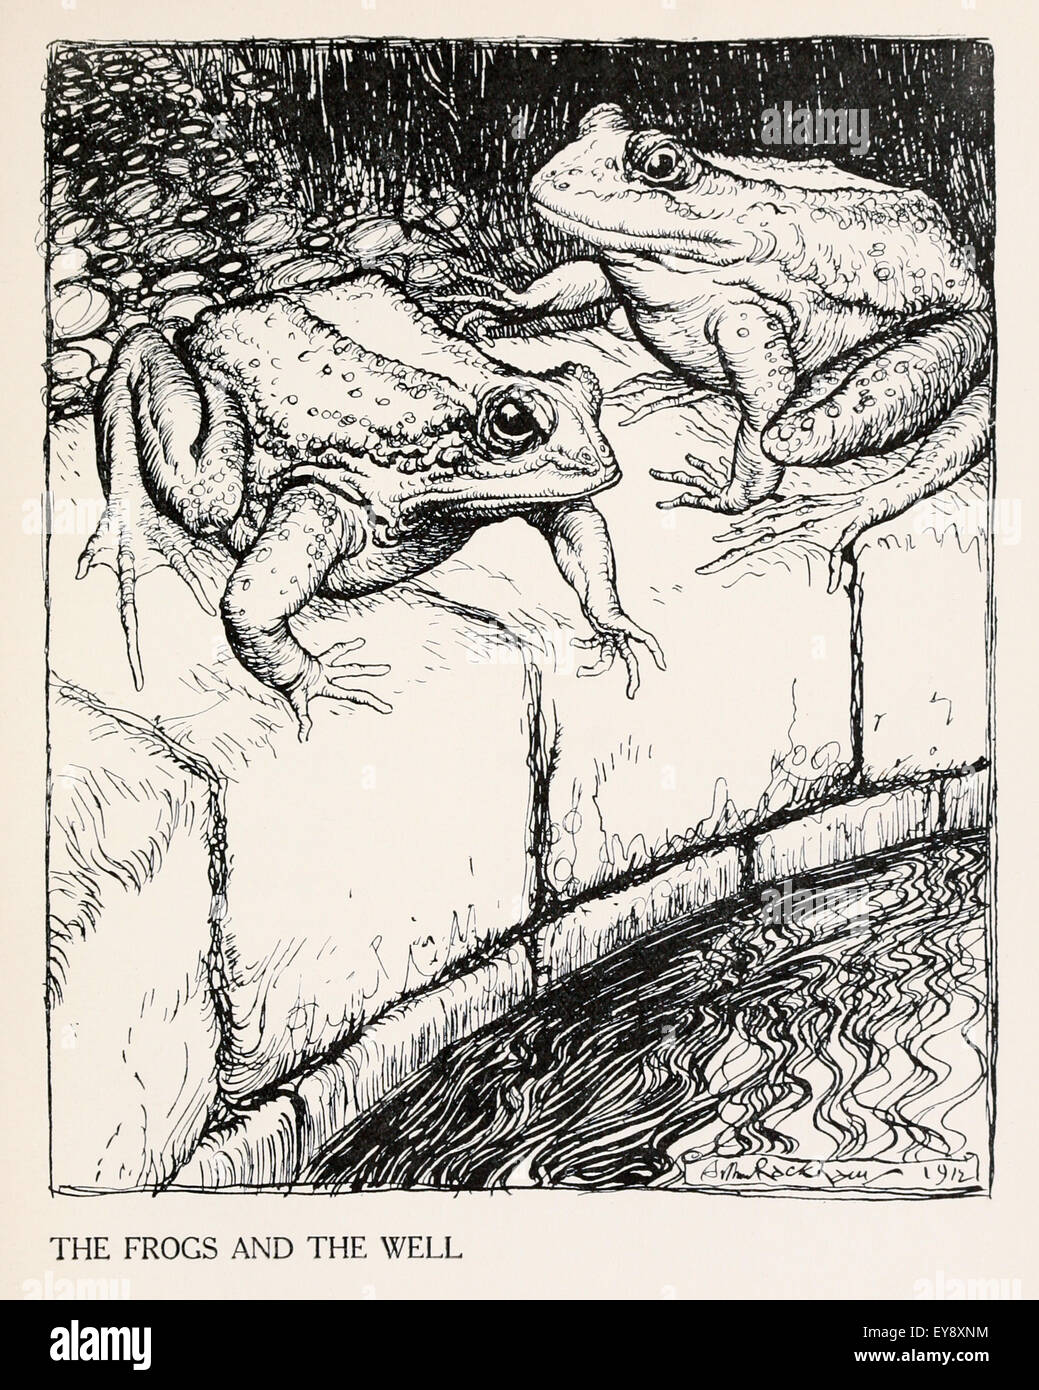 'The Frogs and the Well' fable by Aesop (circa 600BC). Two Frogs had to leave their dry pond and encountered a well. One said they should live there; the other cautioned about getting out if they needed to. Moral: Look before you leap. Illustration by Arthur Rackham (1867-1939). See description for more information. Stock Photo